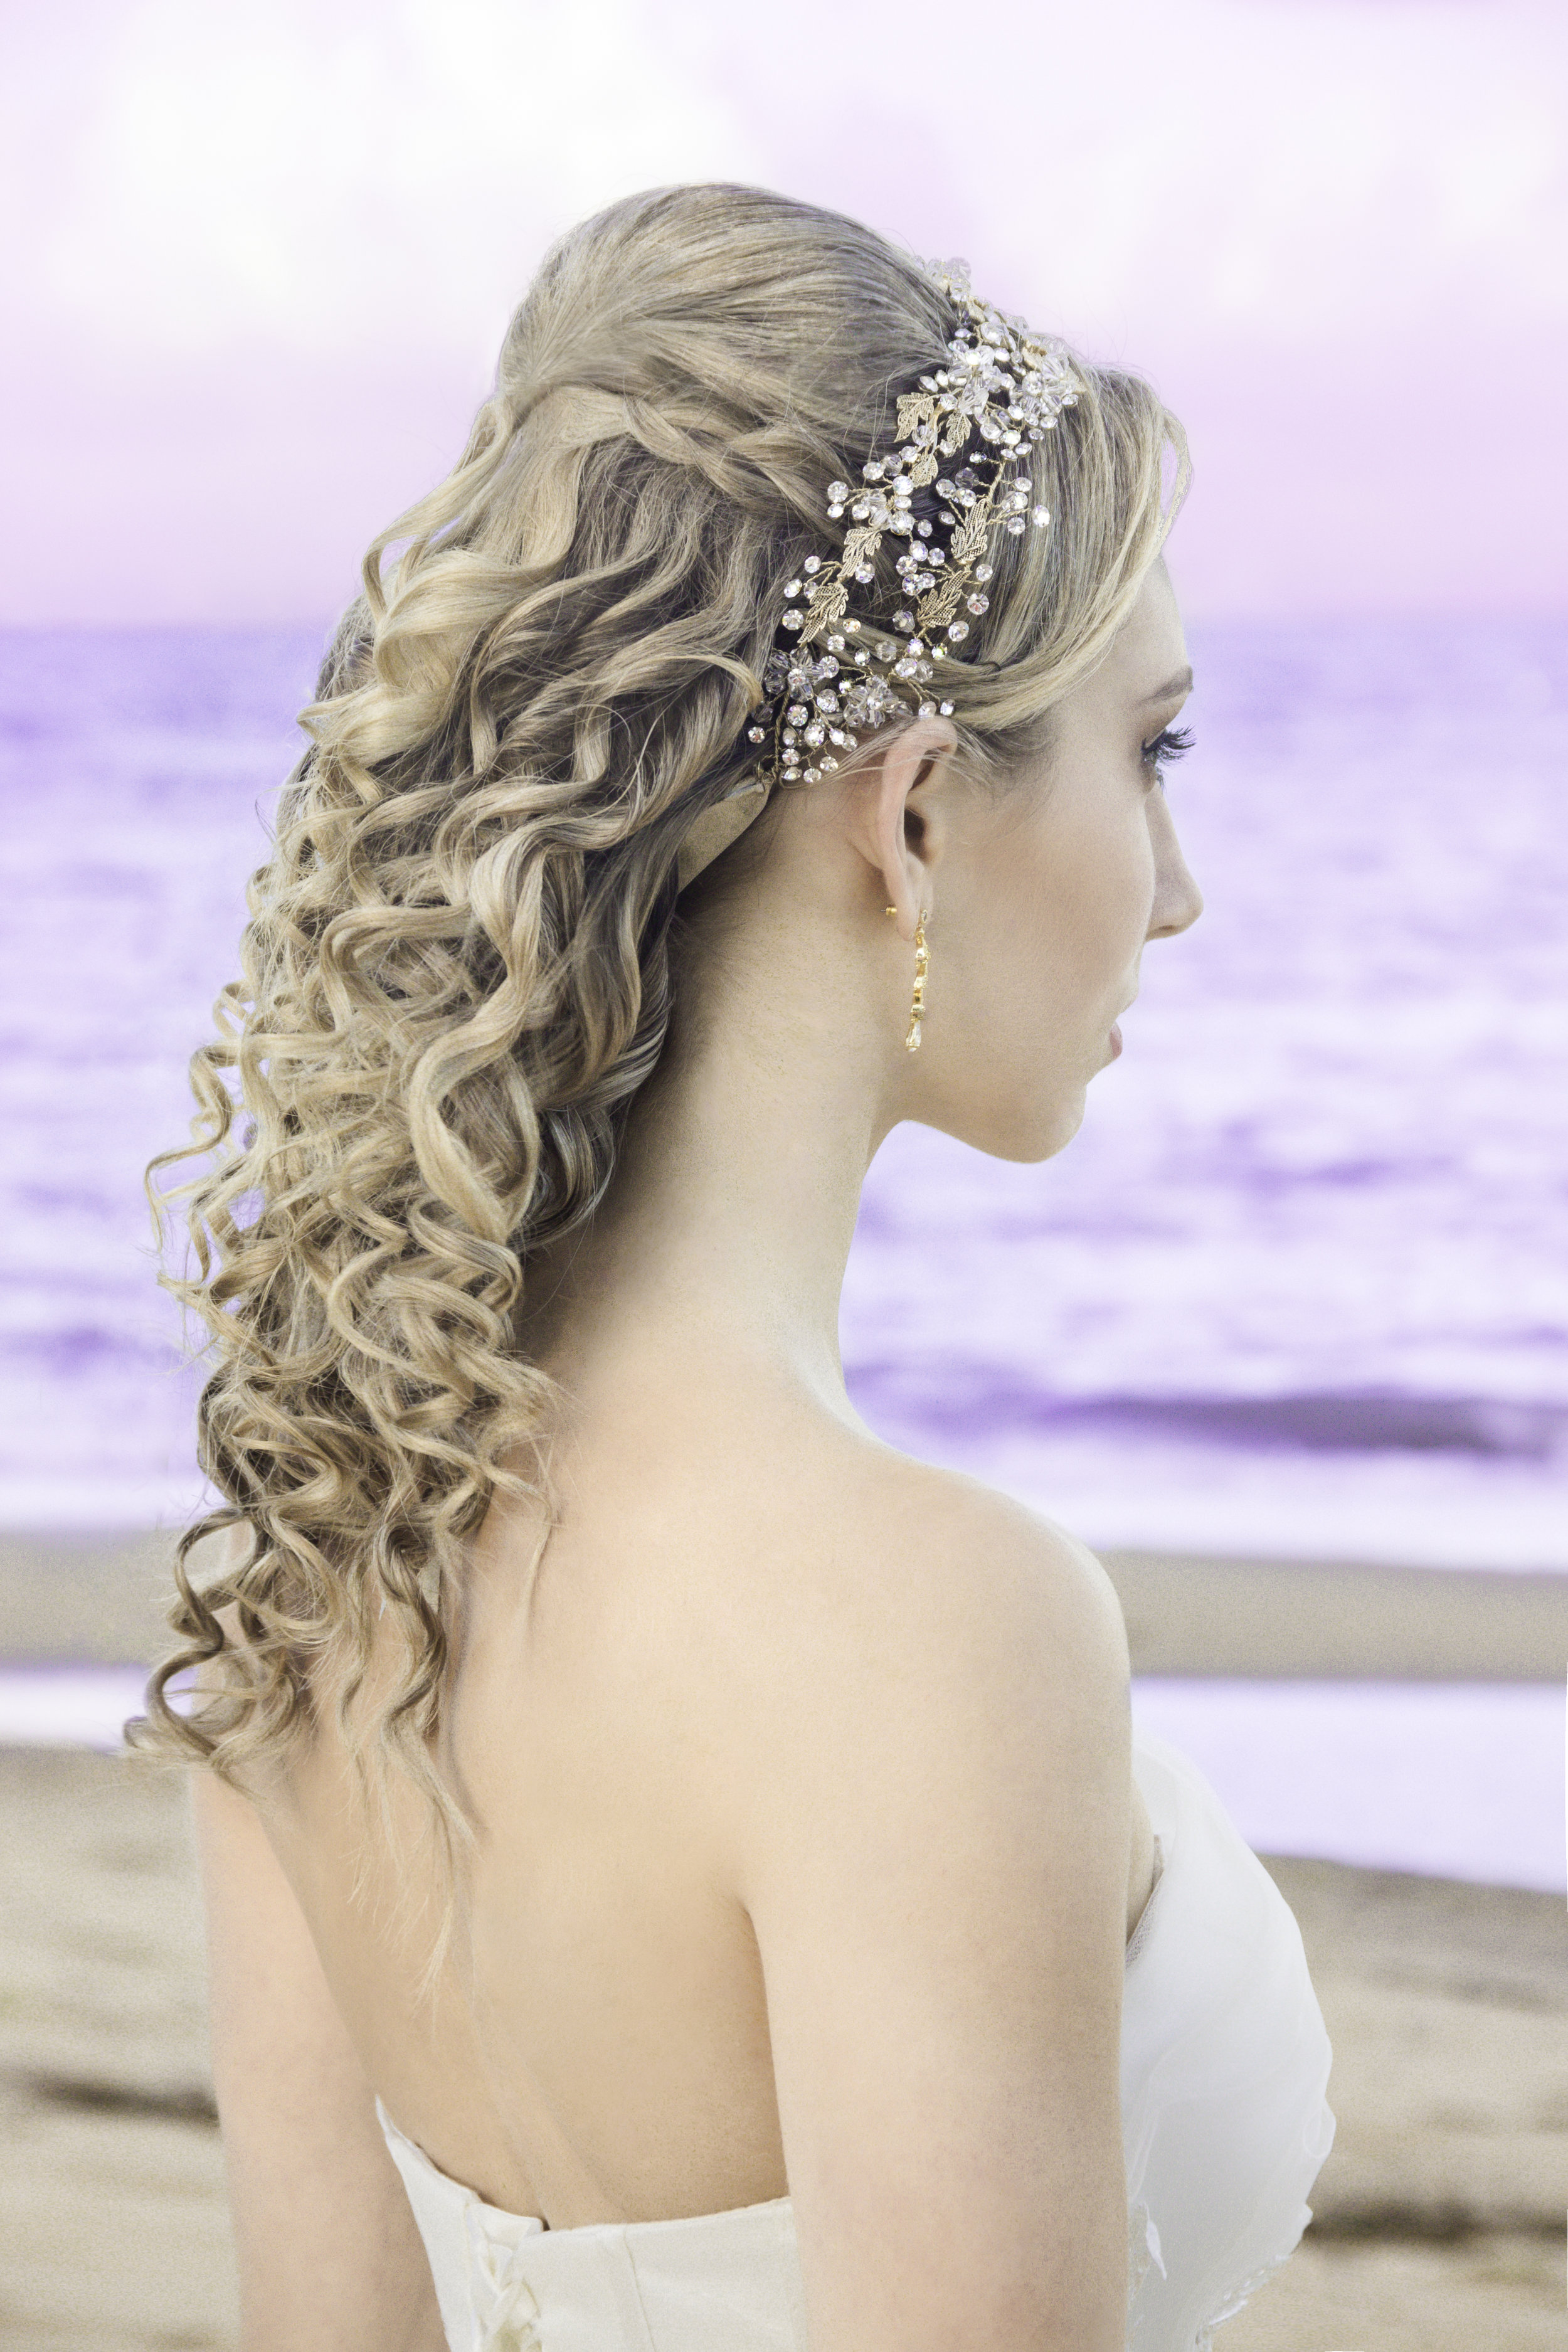 Bridal Hair #1 half up bouffant with curls